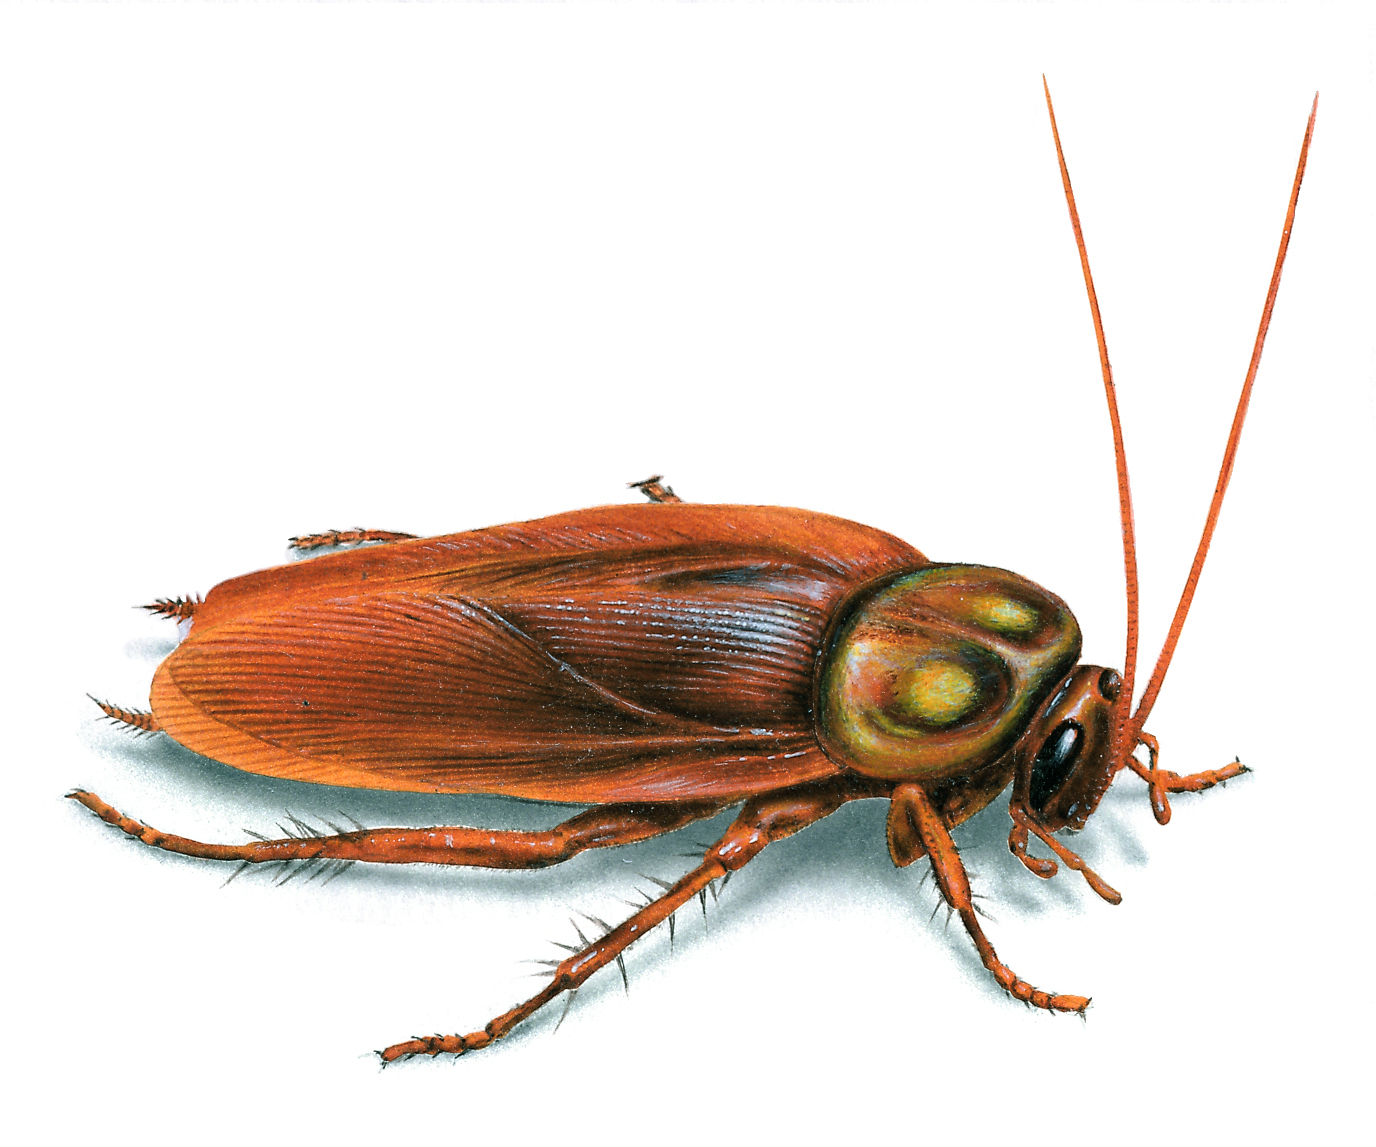 Pictures of Cockroaches, Images & Photos of a Cockroach